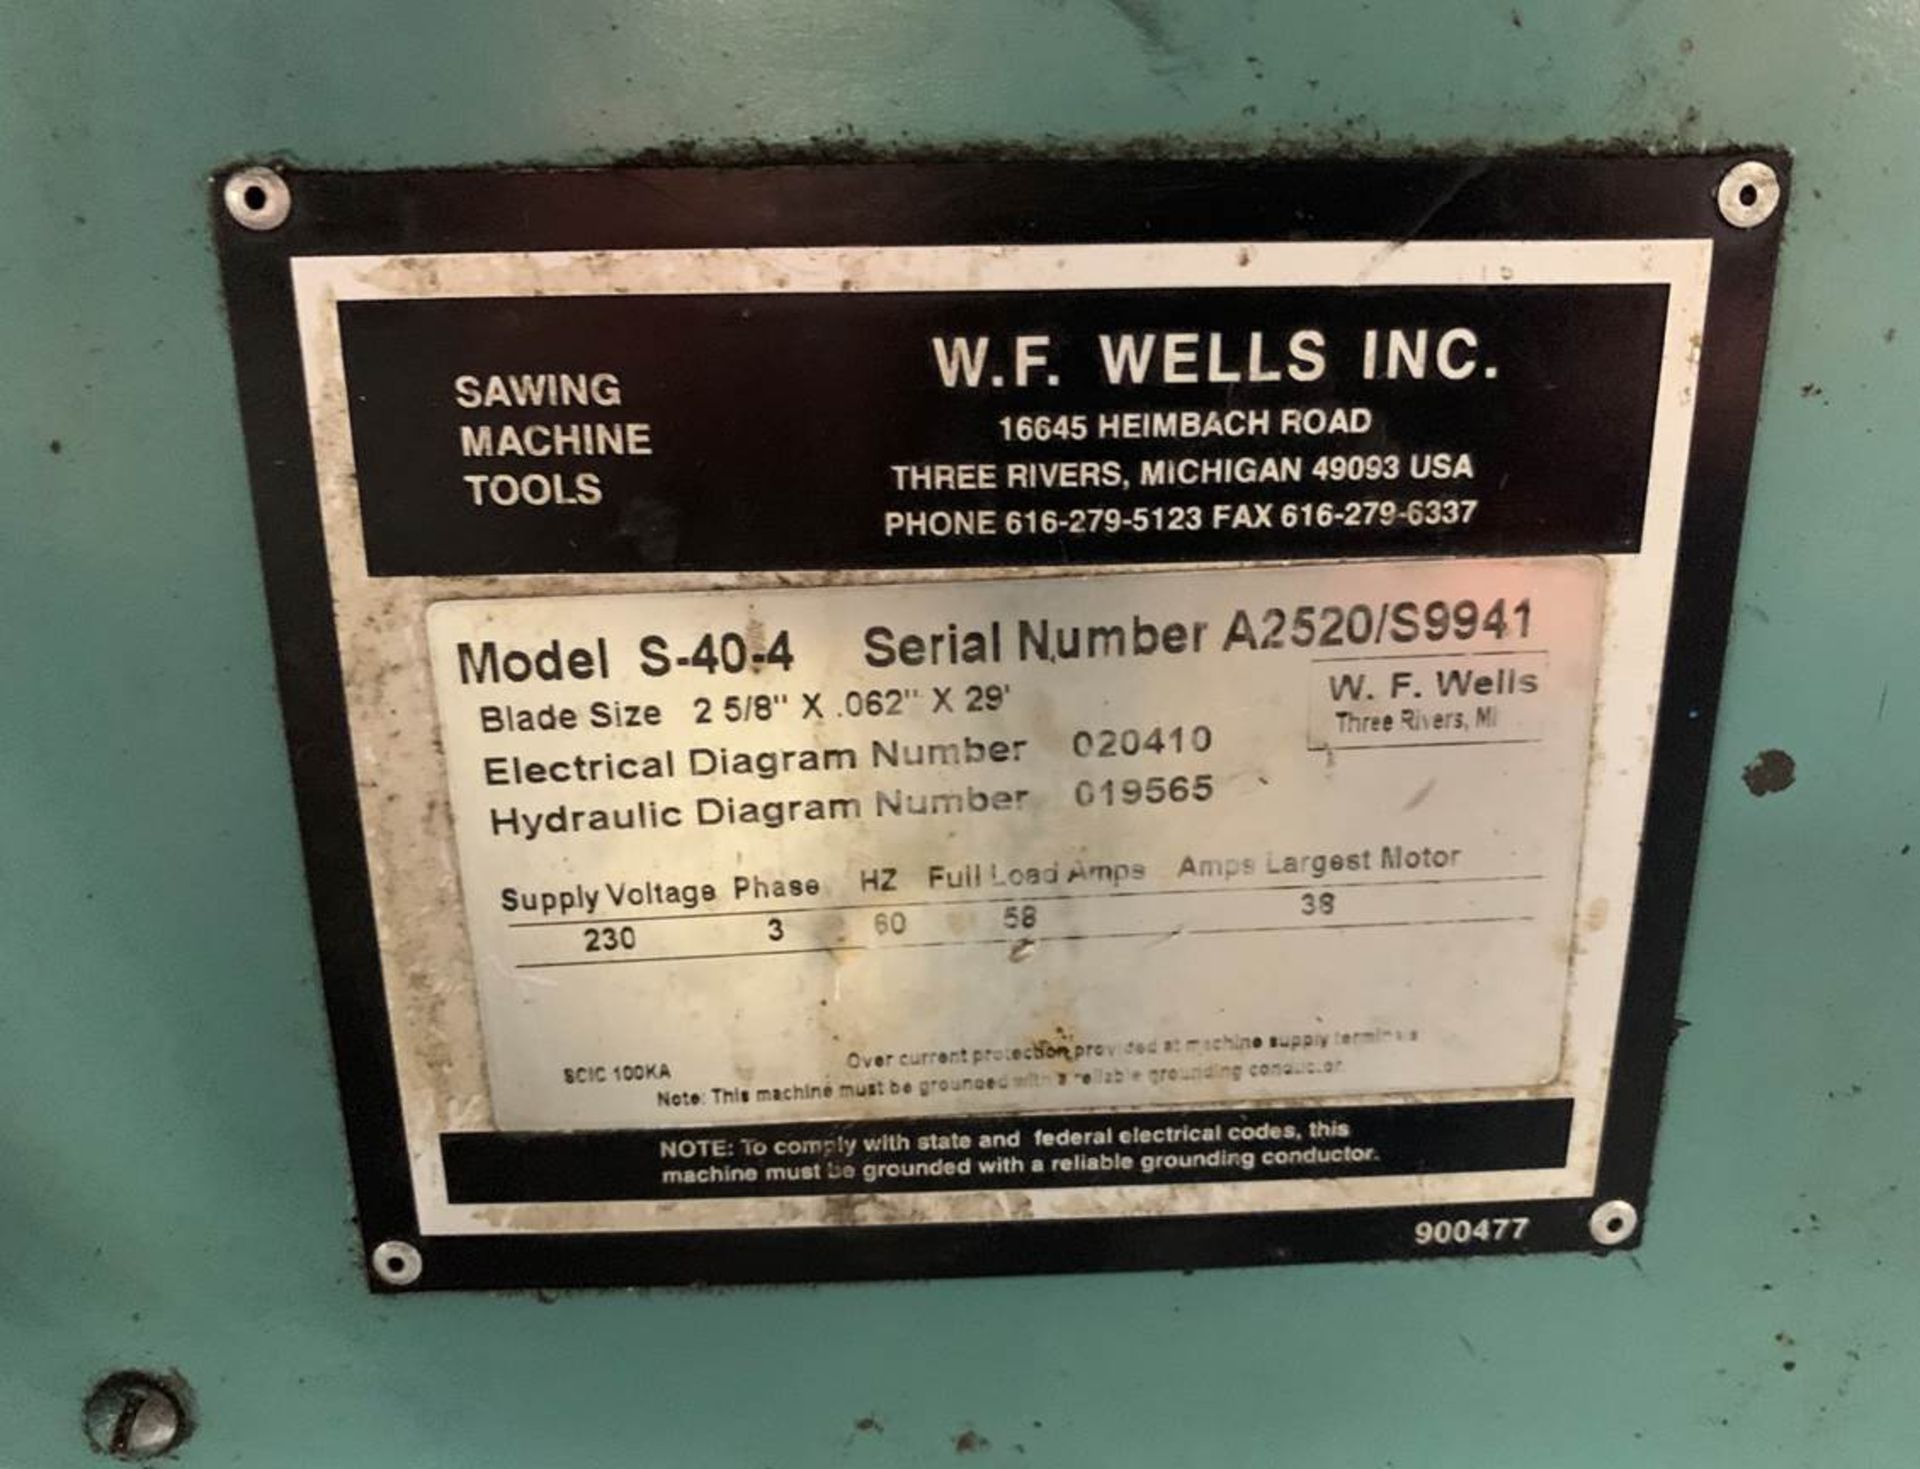 W.F. WELLS MODEL S-40-4 LARGE CAPACITY SEMI AUTOMATIC TWIN COLUMN BANDSAW: S/N A2520/S9941 - Image 3 of 3